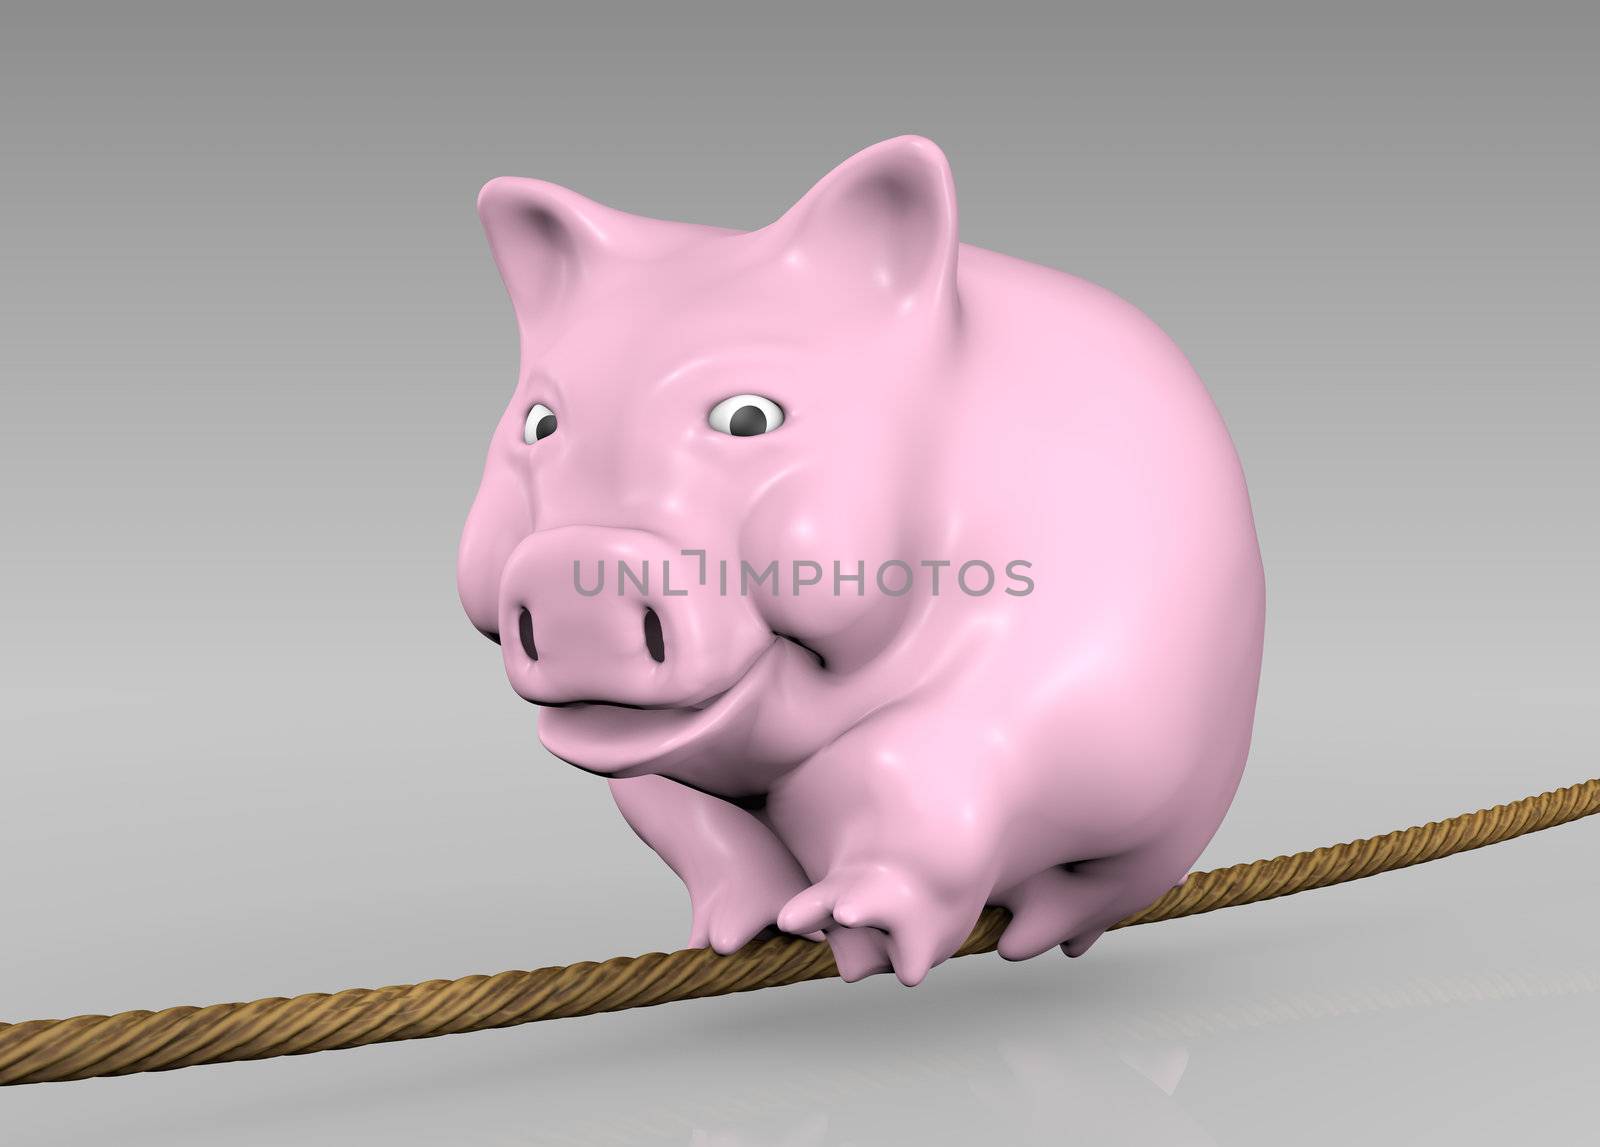 a happy pink piggy is doing the tightrope on a tense brown rope suspended in the air